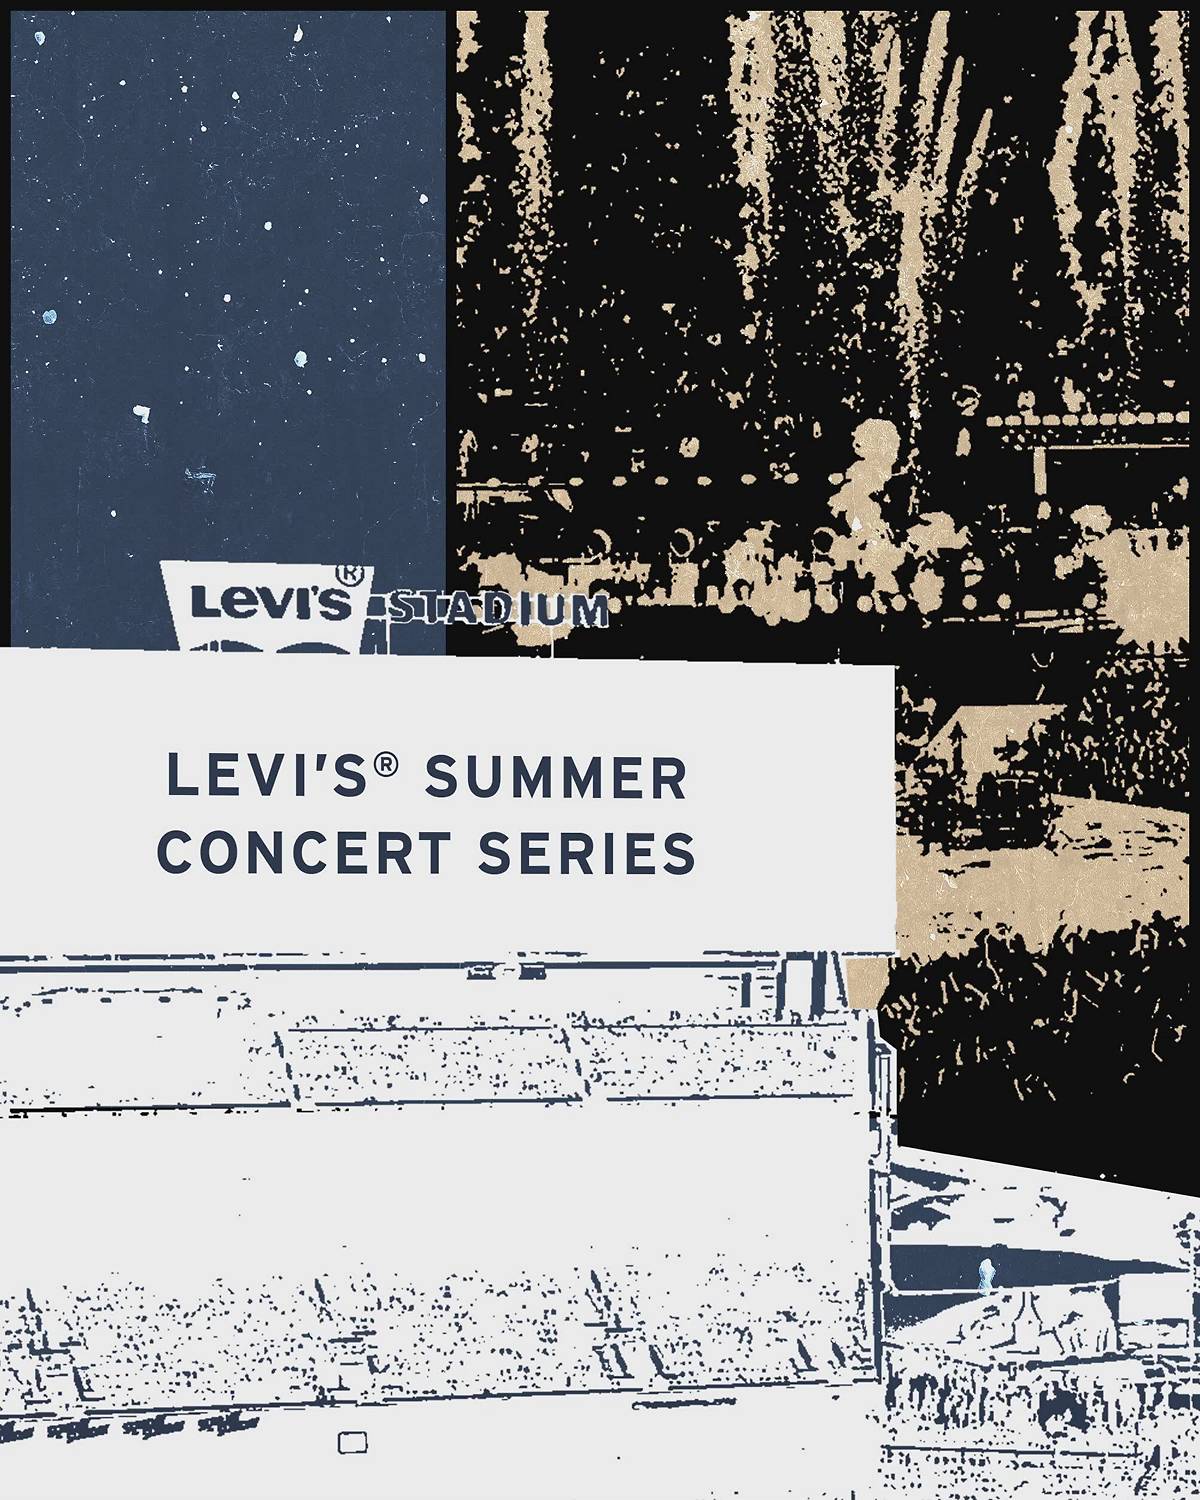 White illustrated Levi's® Stadium graphic with words "Levi's® Summer Concert Series" on billboard with rotating textured multi colored background.